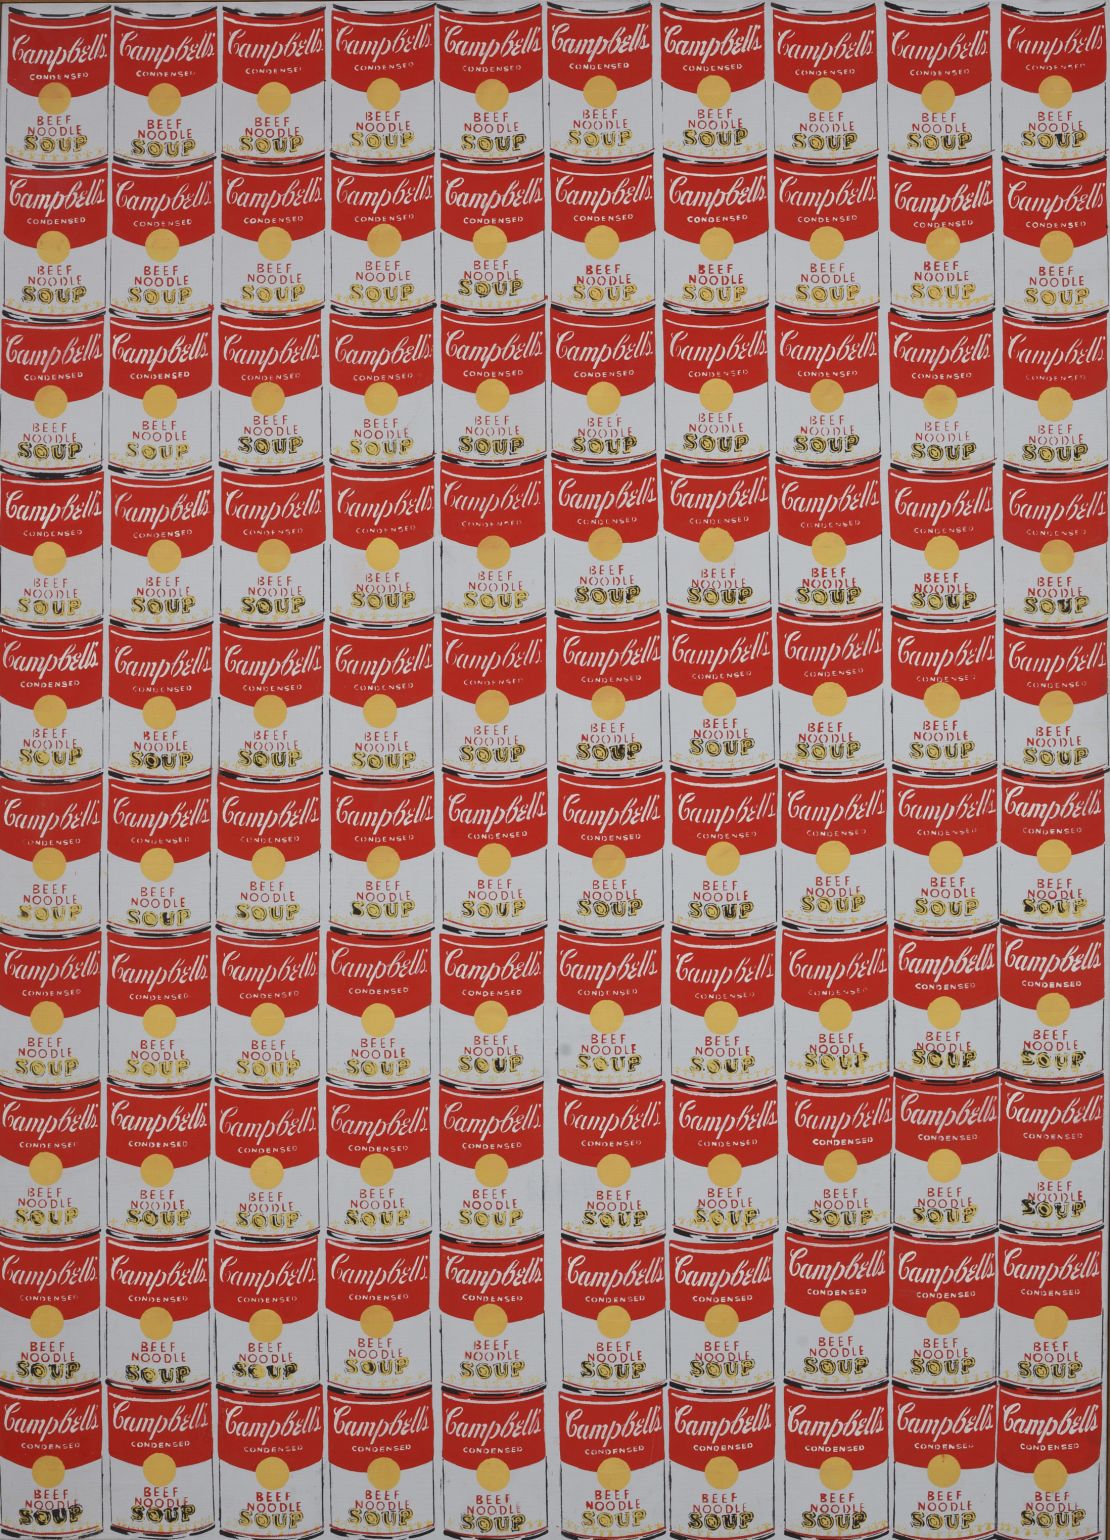 "100 Campbell's Soup Cans," 1962, by Andy Warhol. 